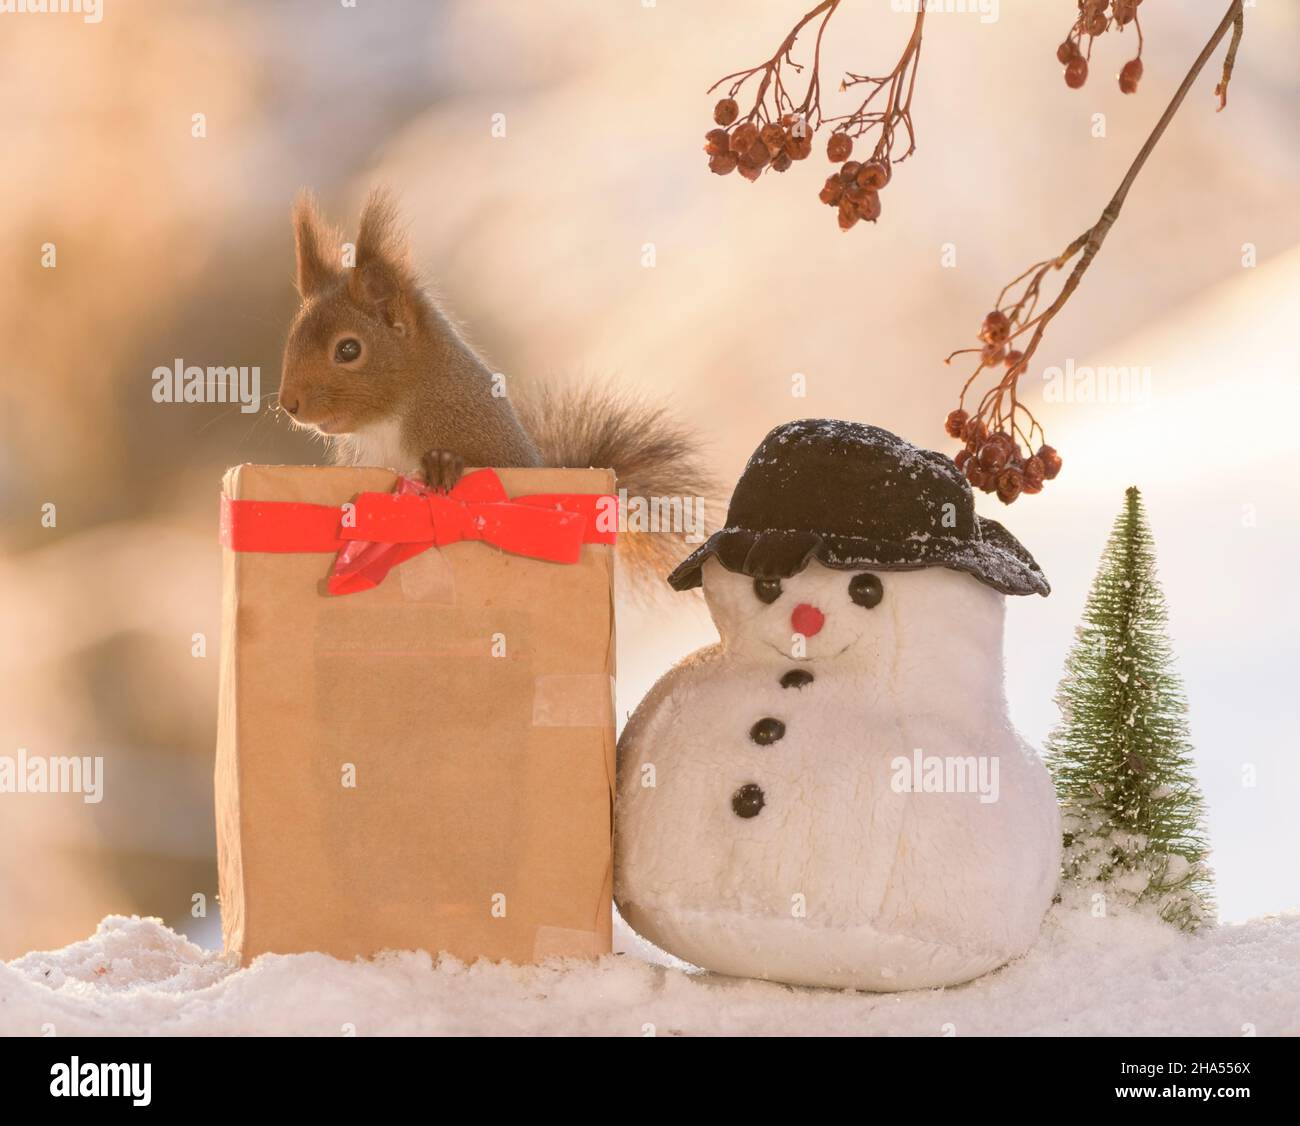 red squirrel are standing in an present box with snowman Stock Photo